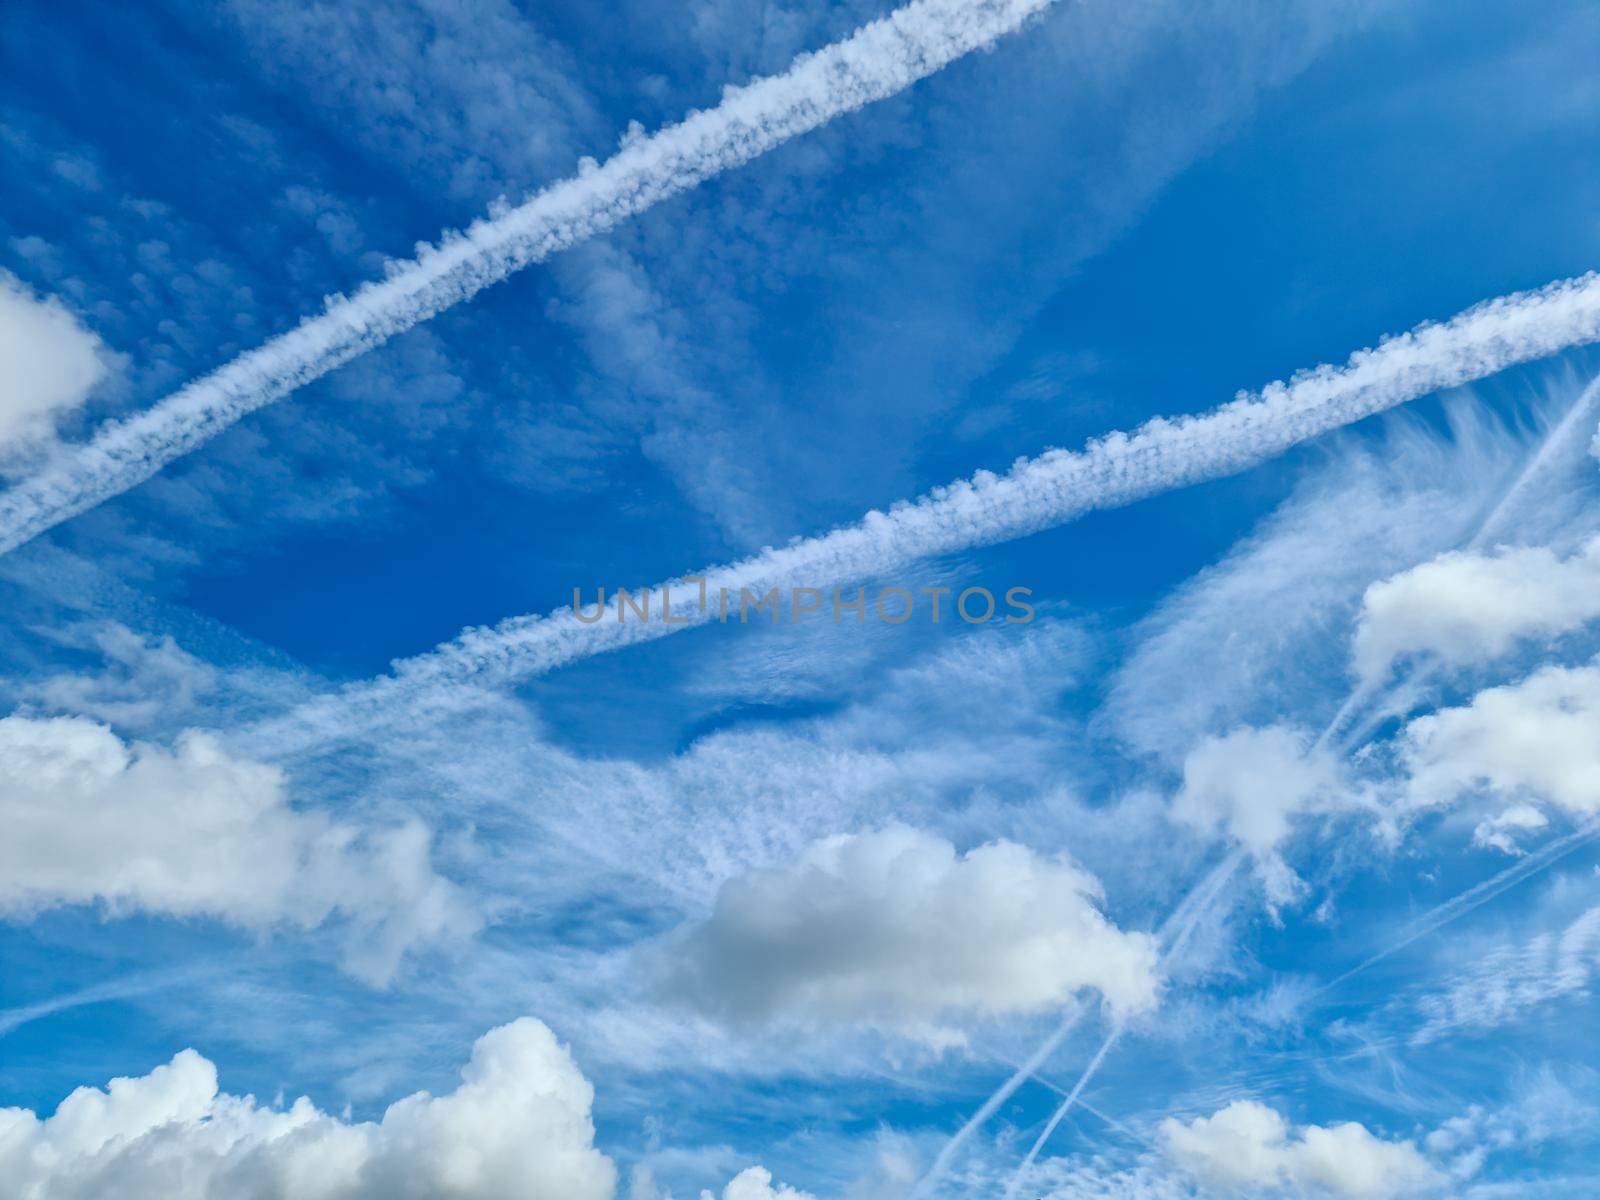 Aircraft condensation contrails in the blue sky inbetween some beautiful clouds